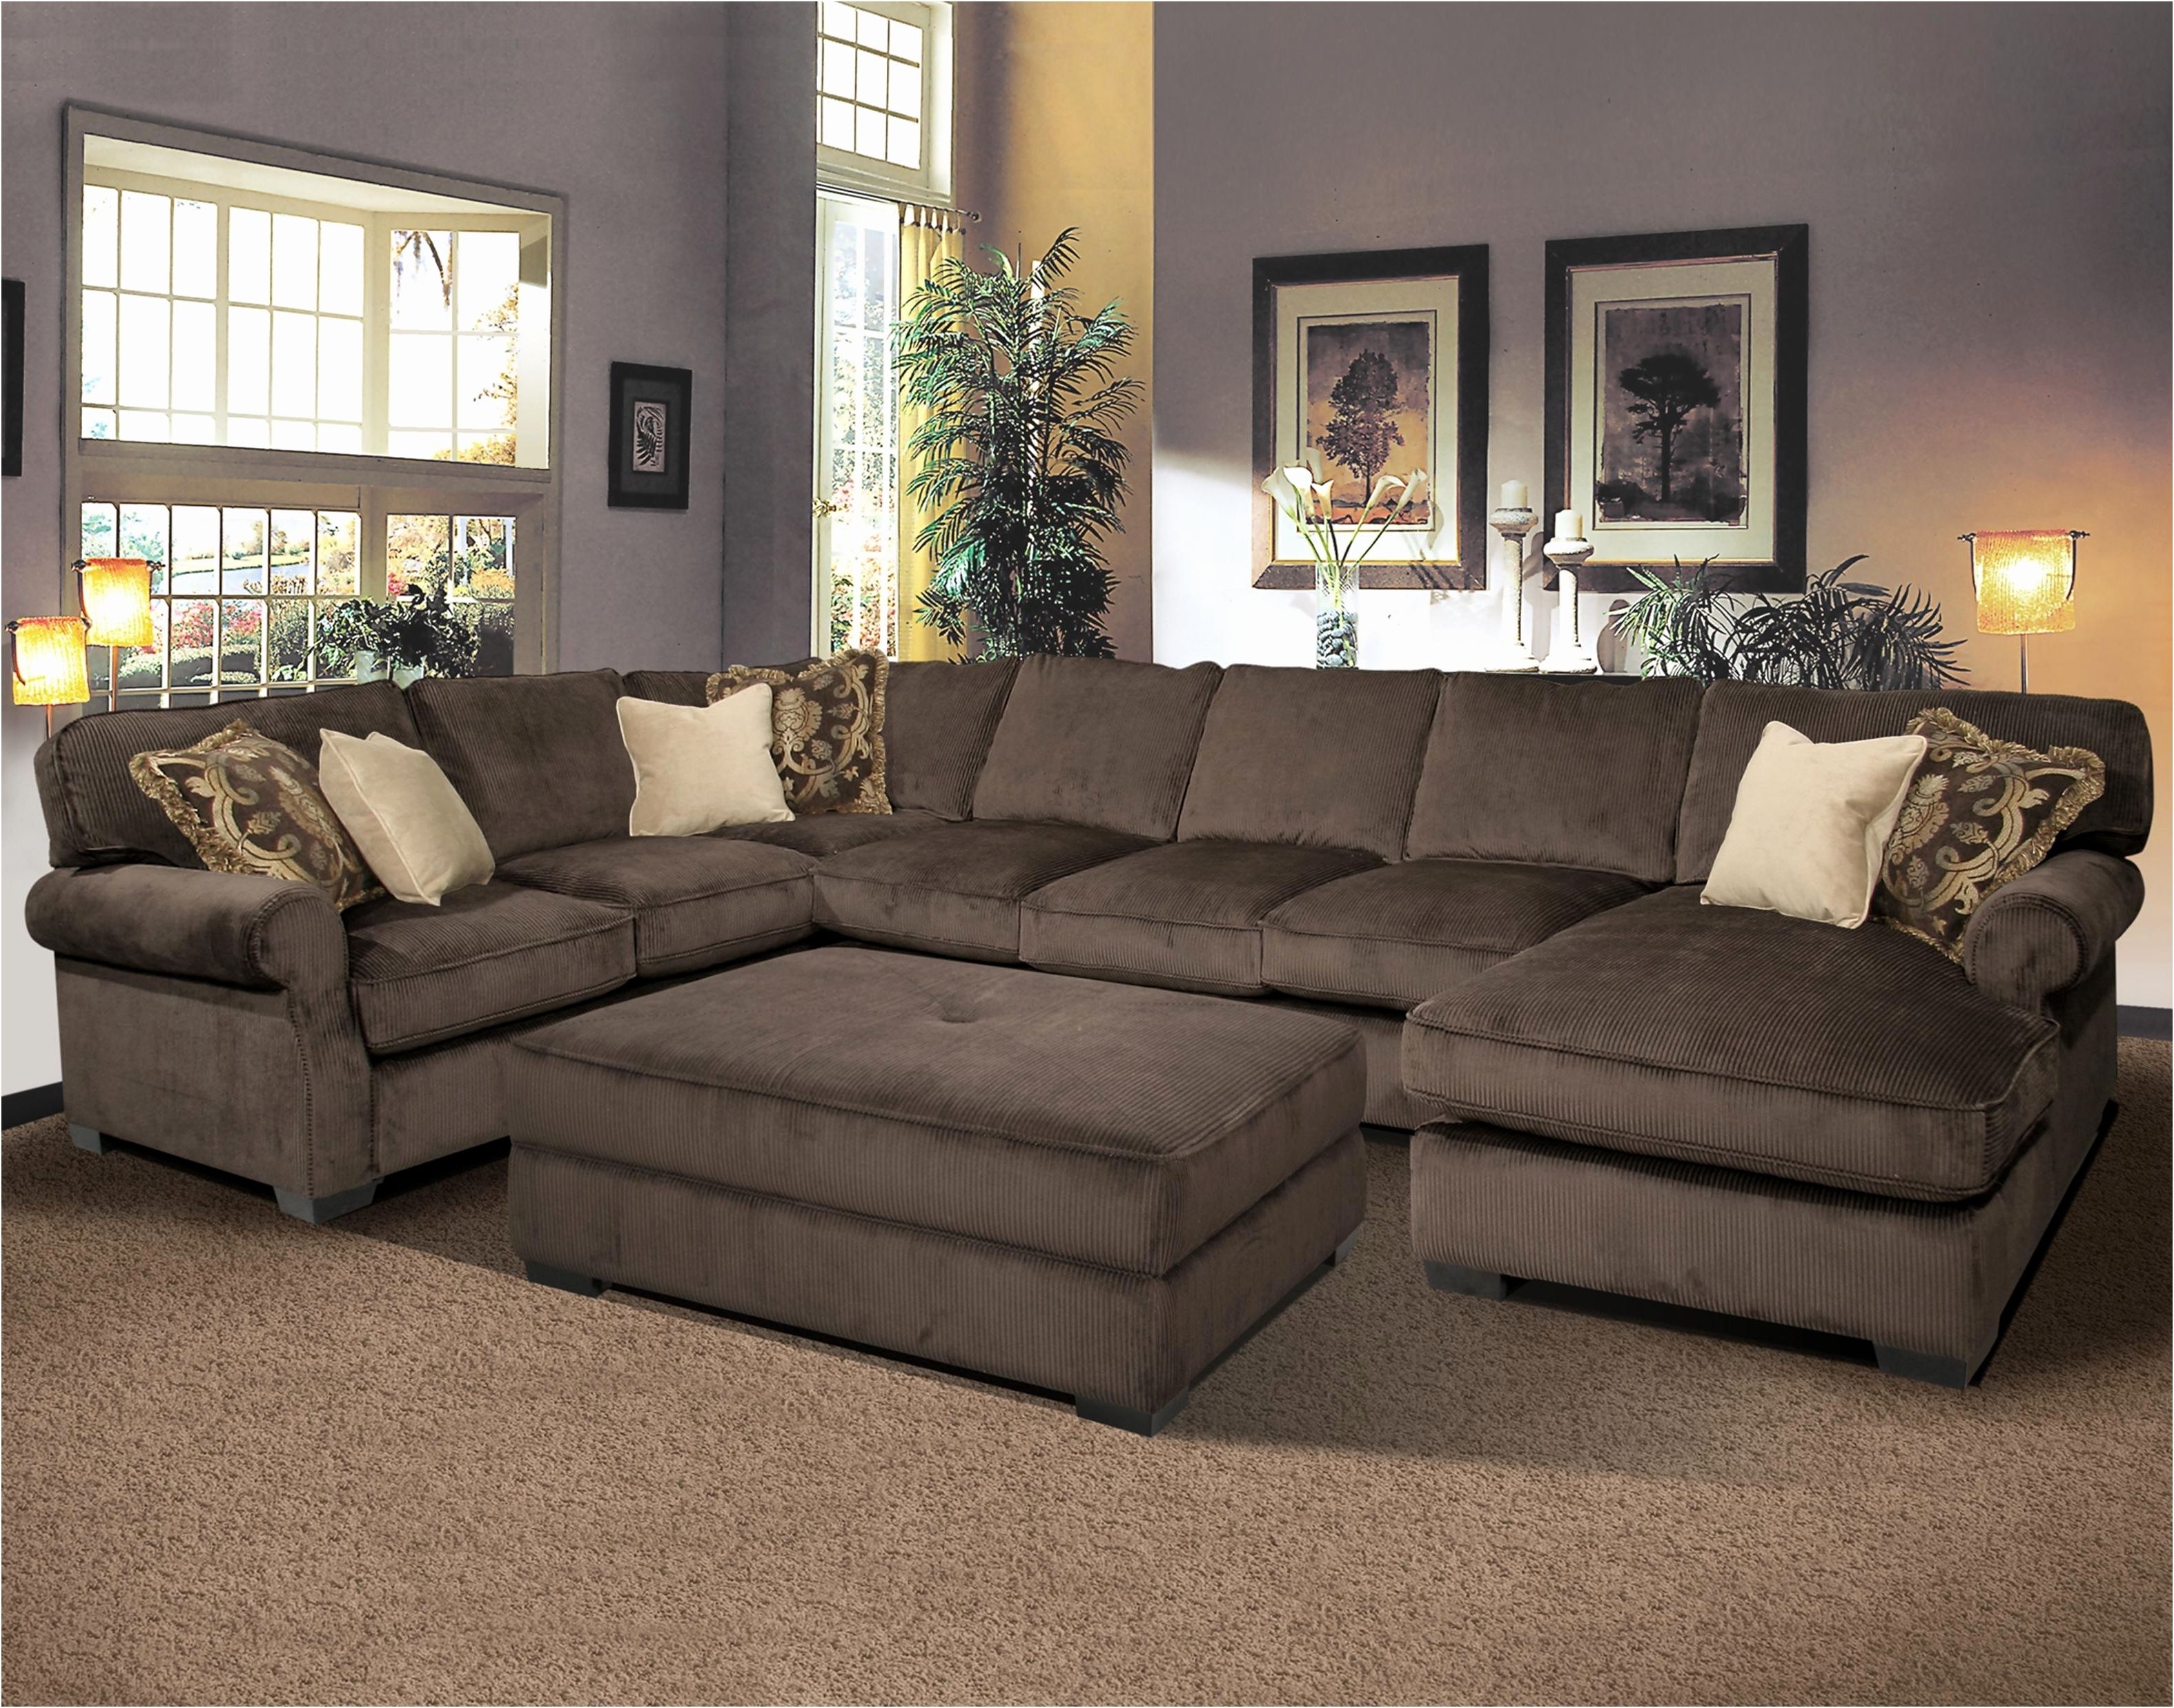 Sectional Sofa Beds Ottawa With Storage Ikea Leather Vancouver For With Regard To Ottawa Sale Sectional Sofas (Photo 6 of 10)